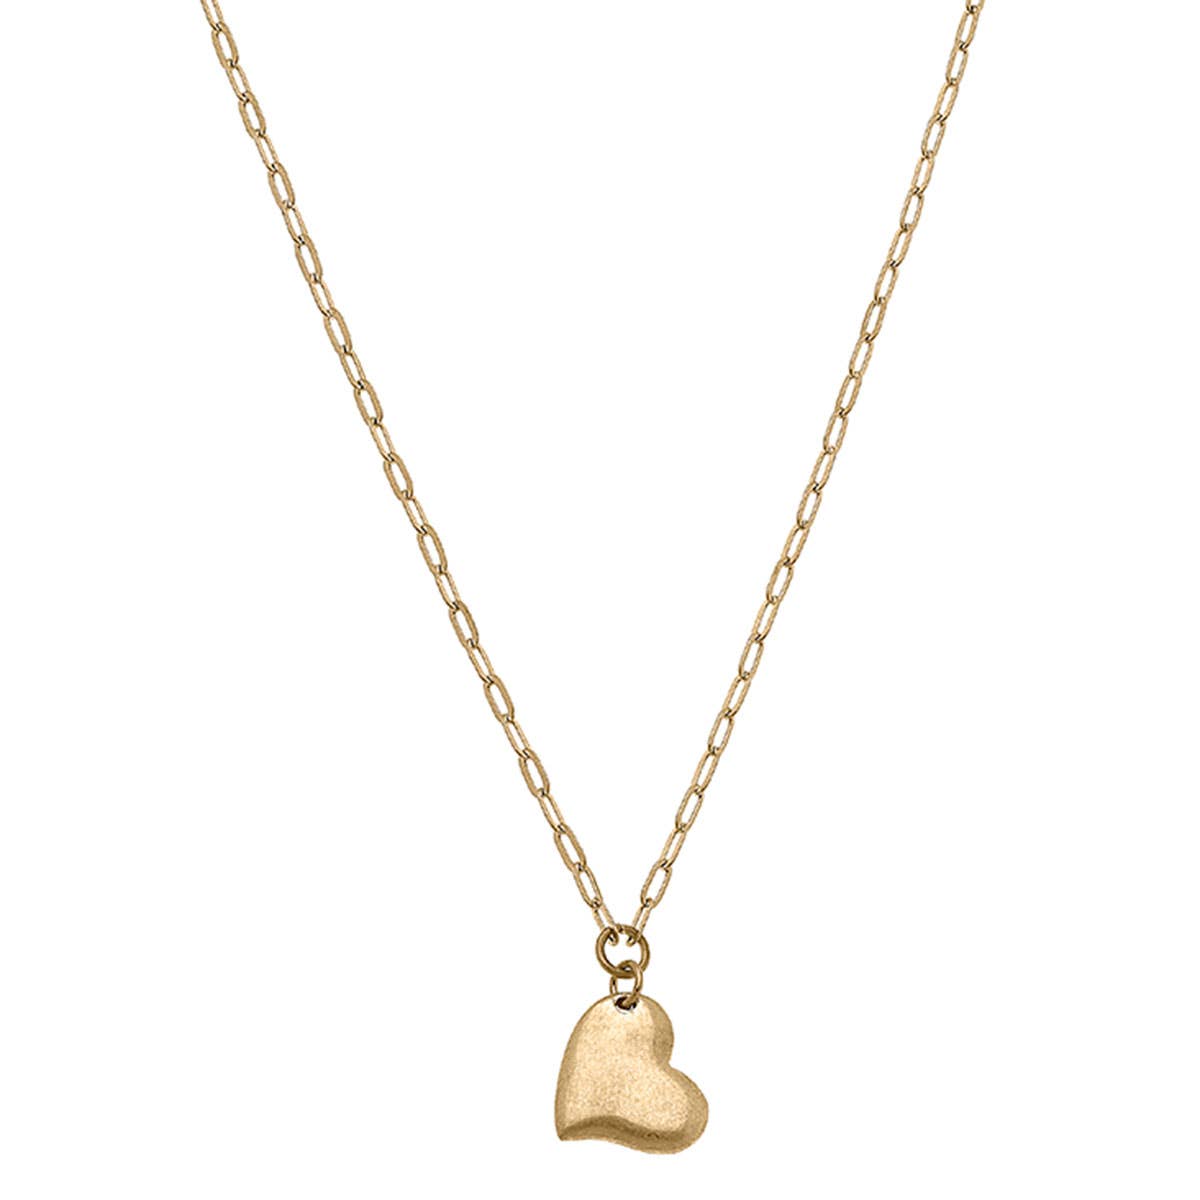 Heart Charm Necklace in Worn Gold